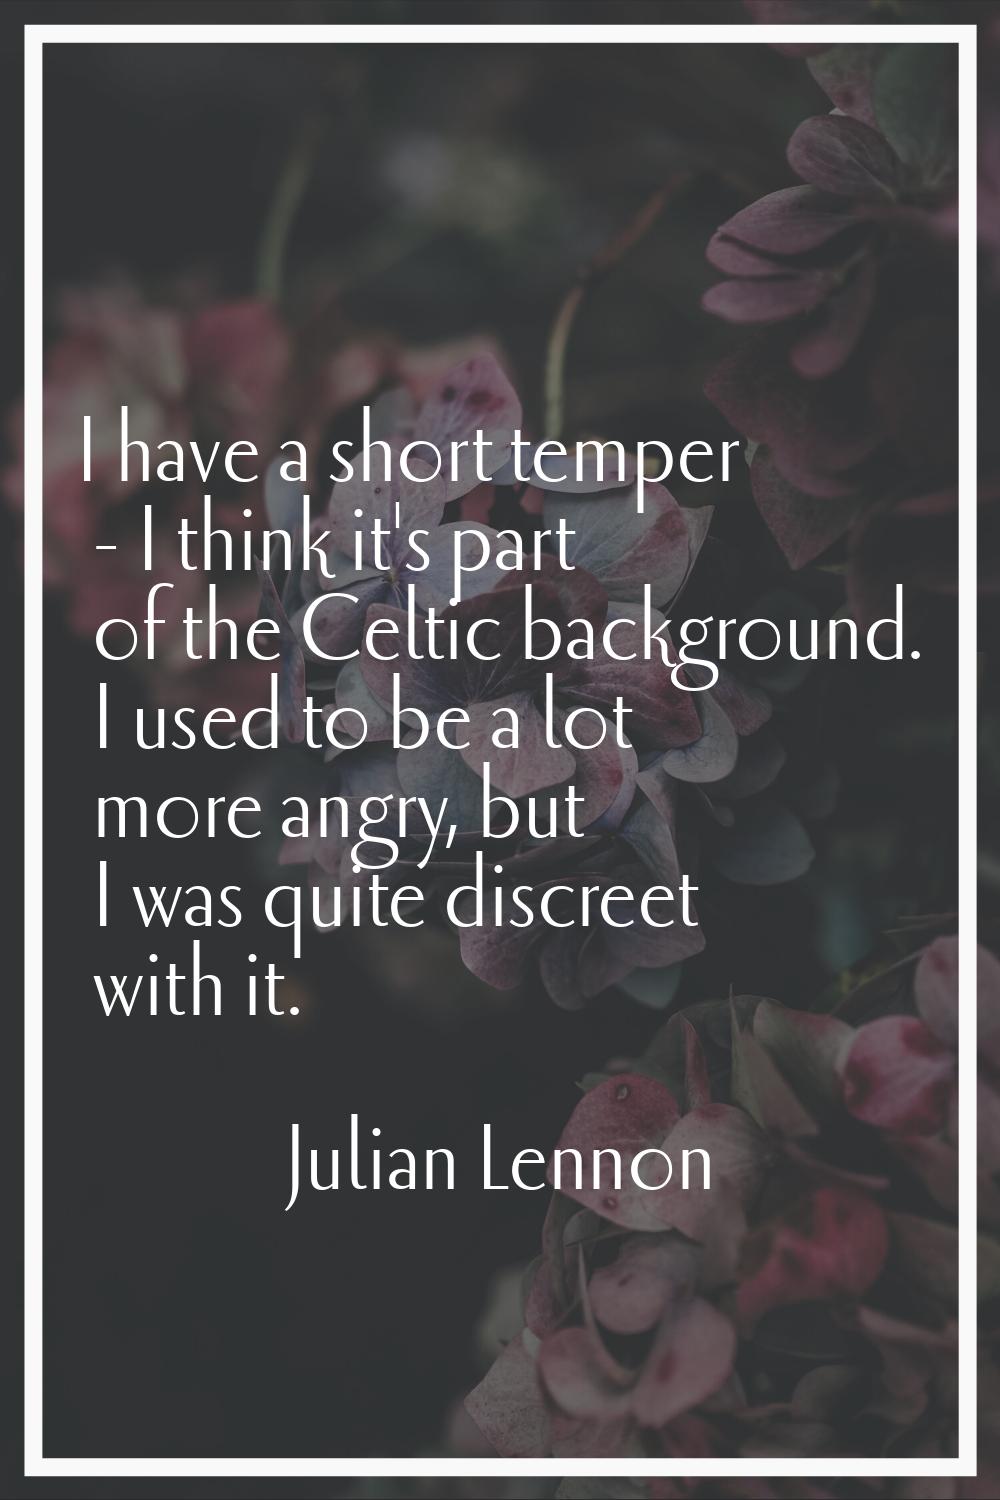 I have a short temper - I think it's part of the Celtic background. I used to be a lot more angry, 